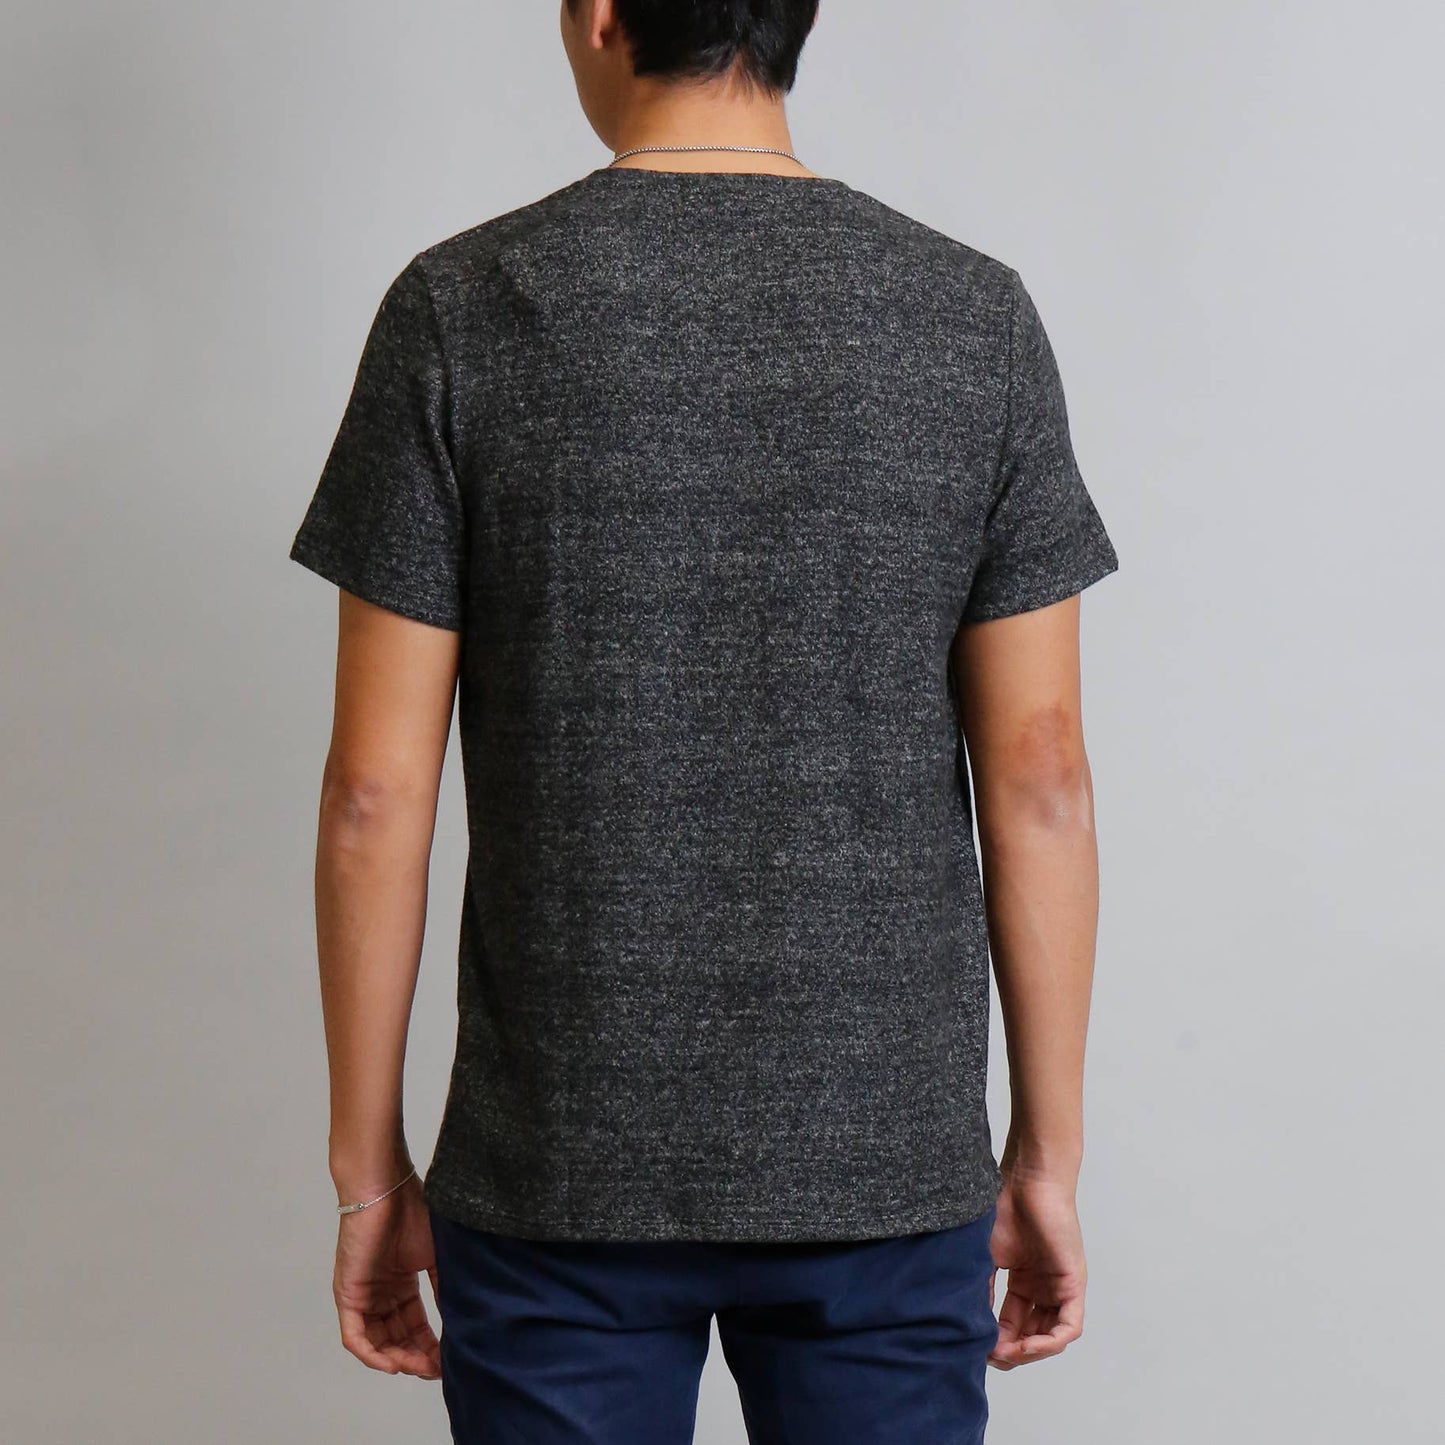 Cozy Knit V Neck Tee - Charcoal